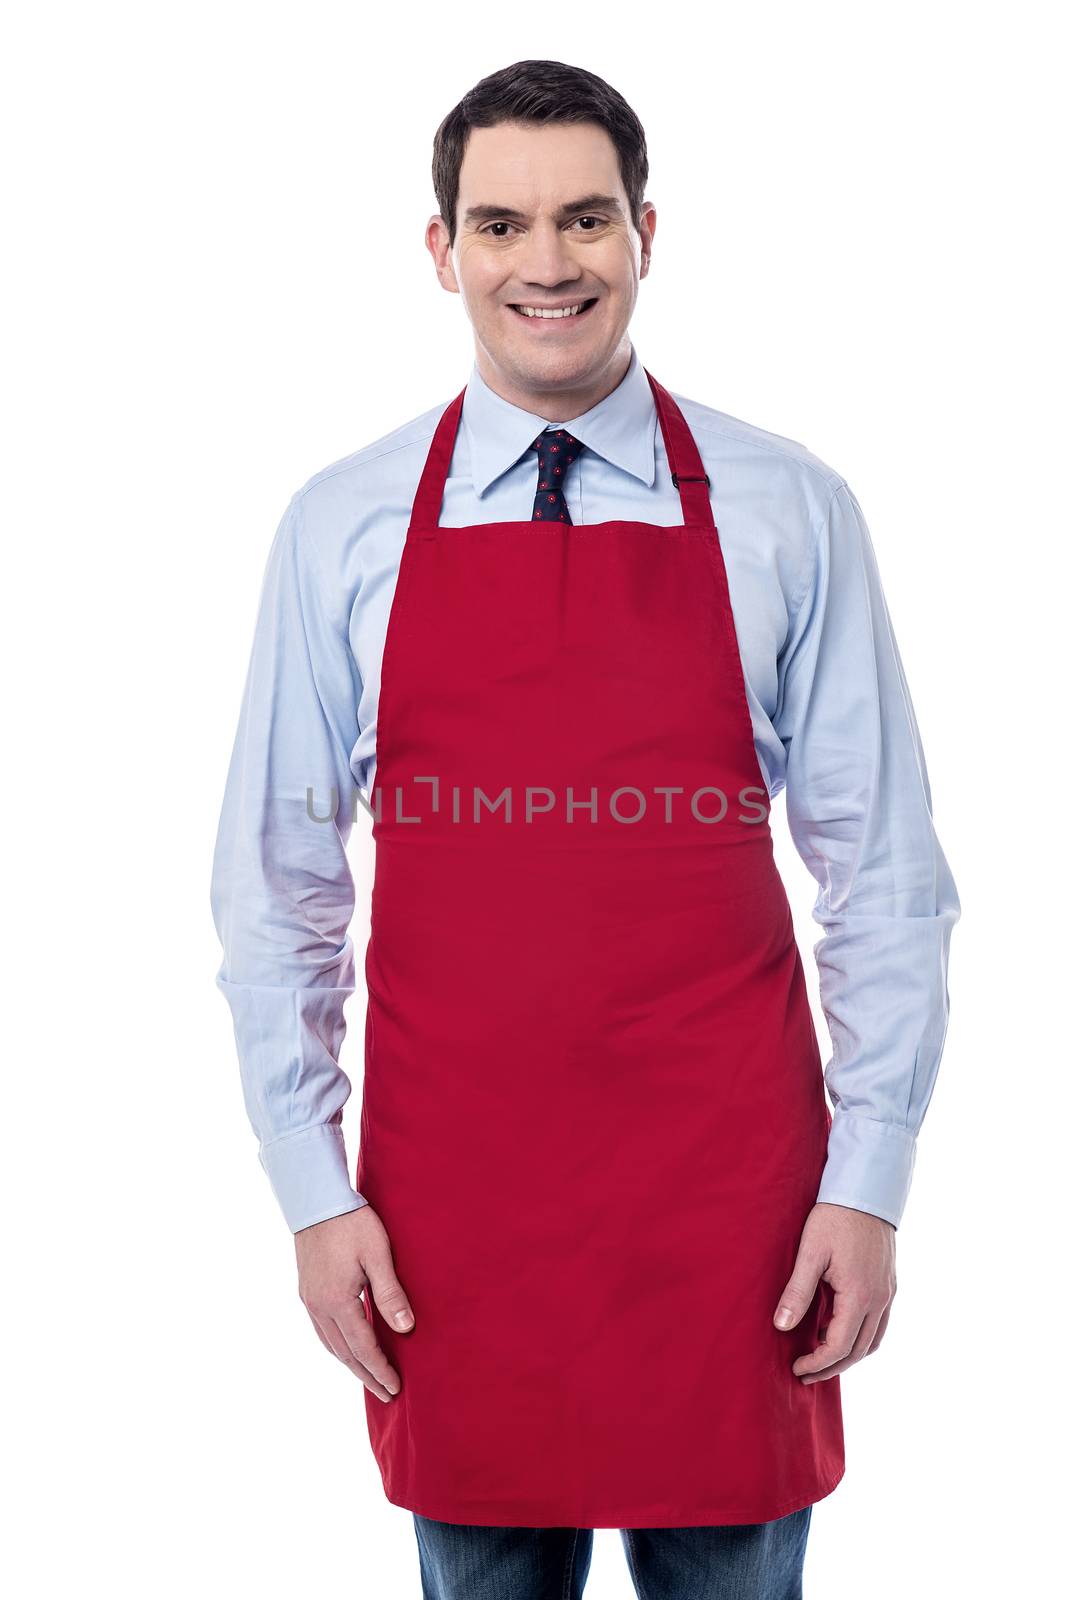 Image of a confident male chef posing over white